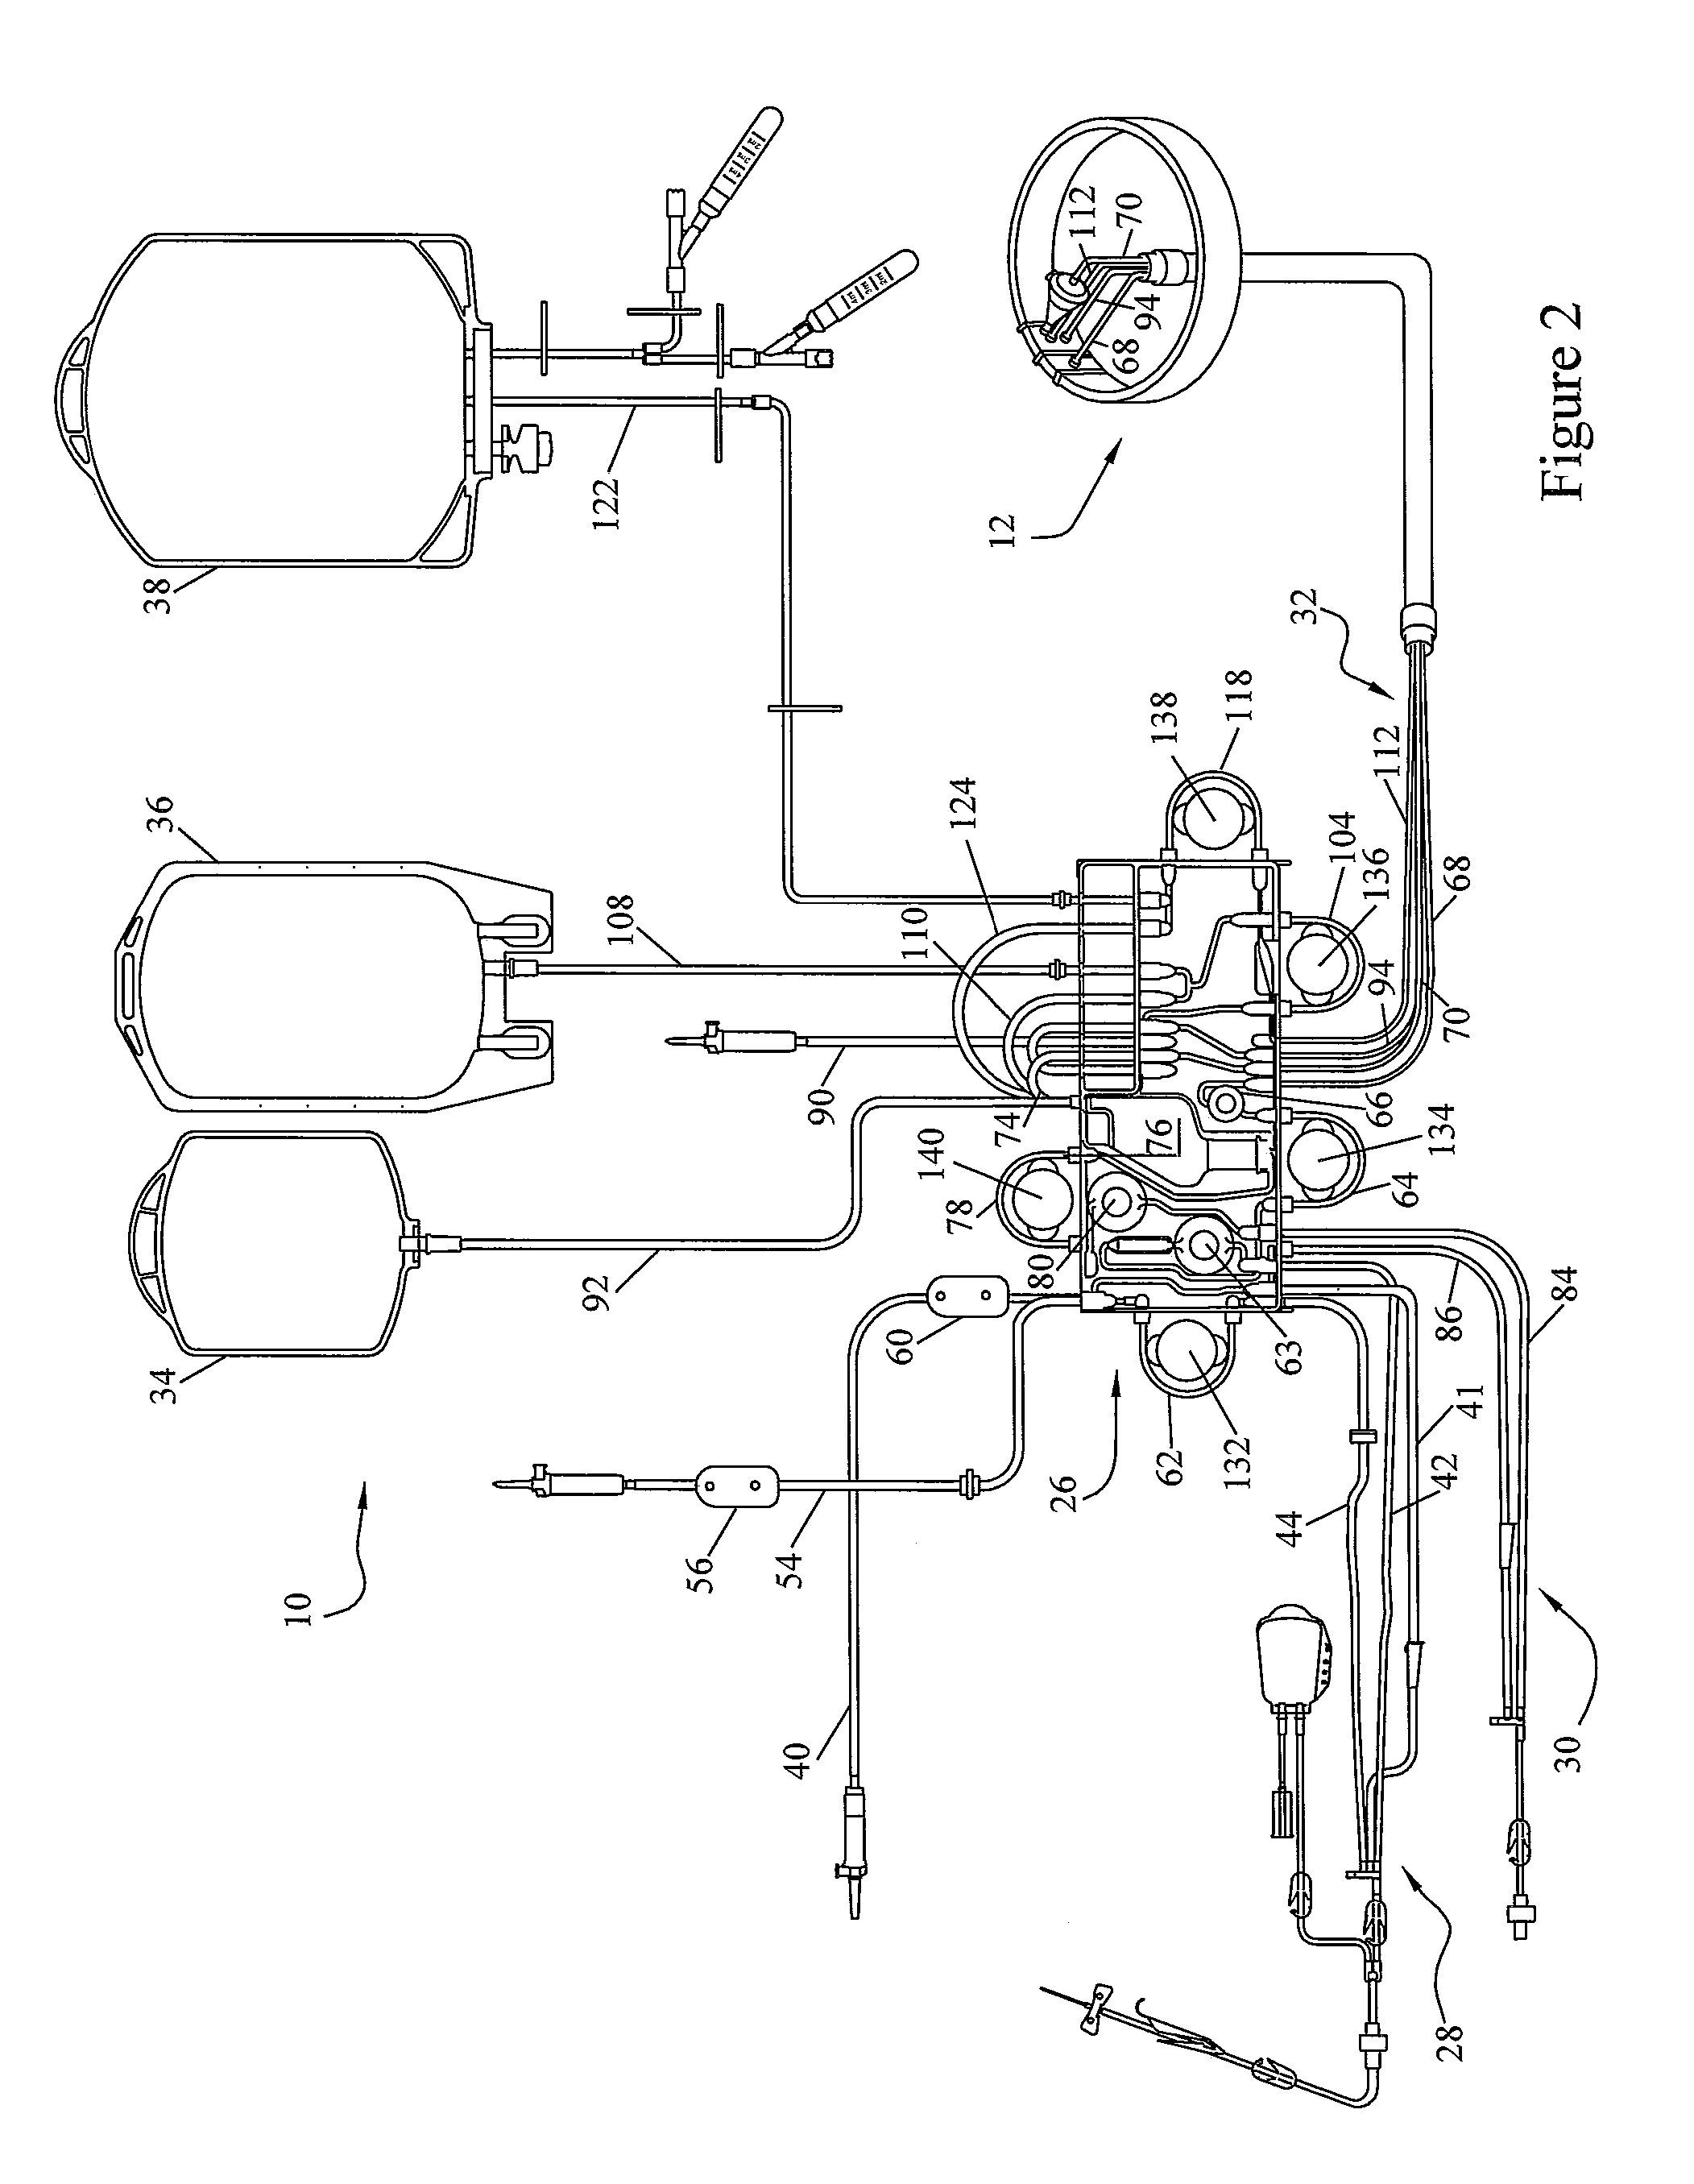 Blood Processing Apparatus with Air Bubble Detector